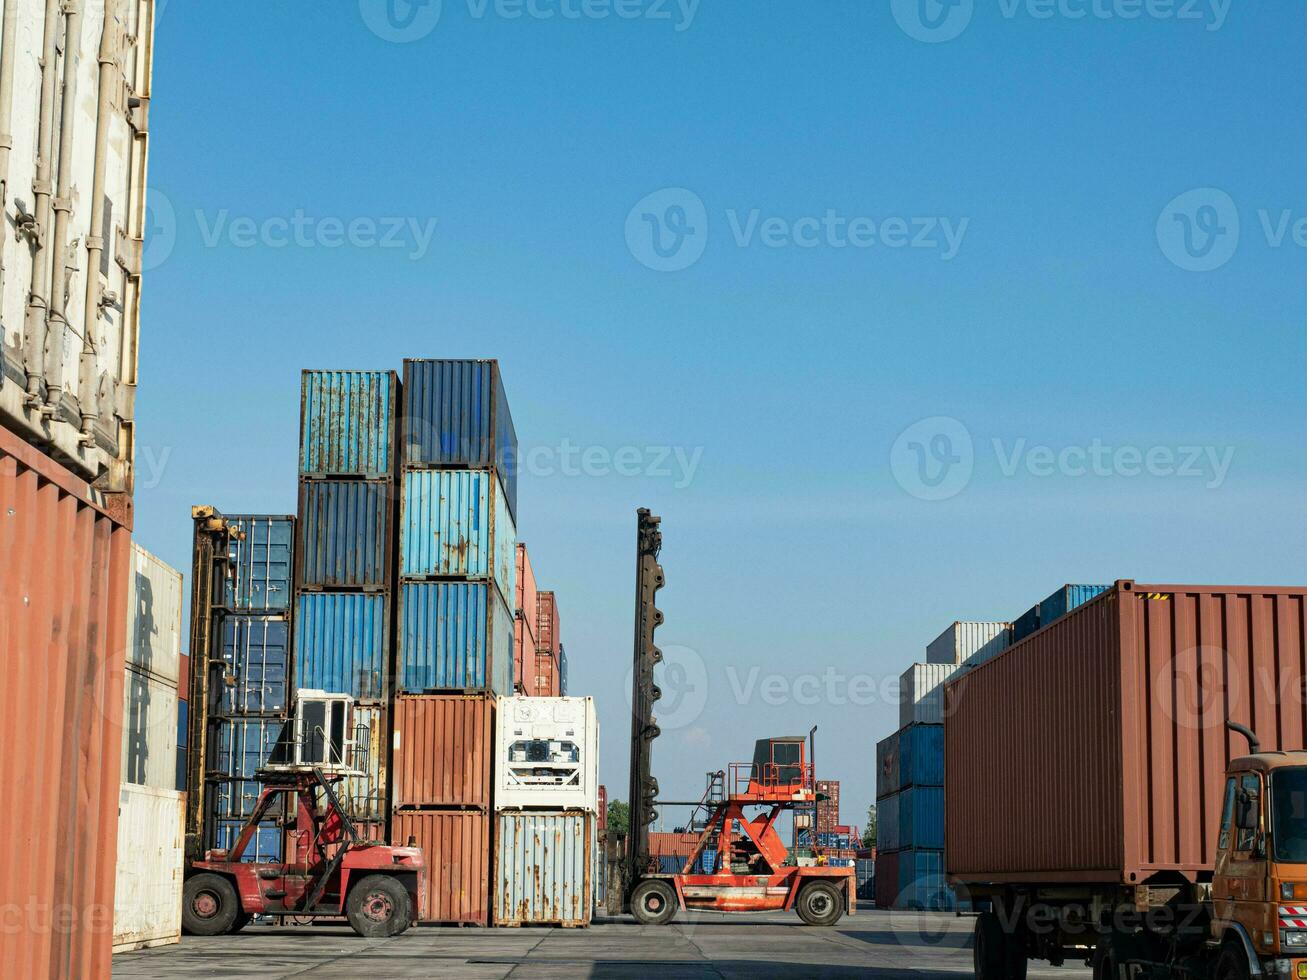 container blue orange color forklift crane cargo logistic industry import export delivery trade global loading truck commerce storage good dock warehouse economy worldwide stack box heavy freight ship photo